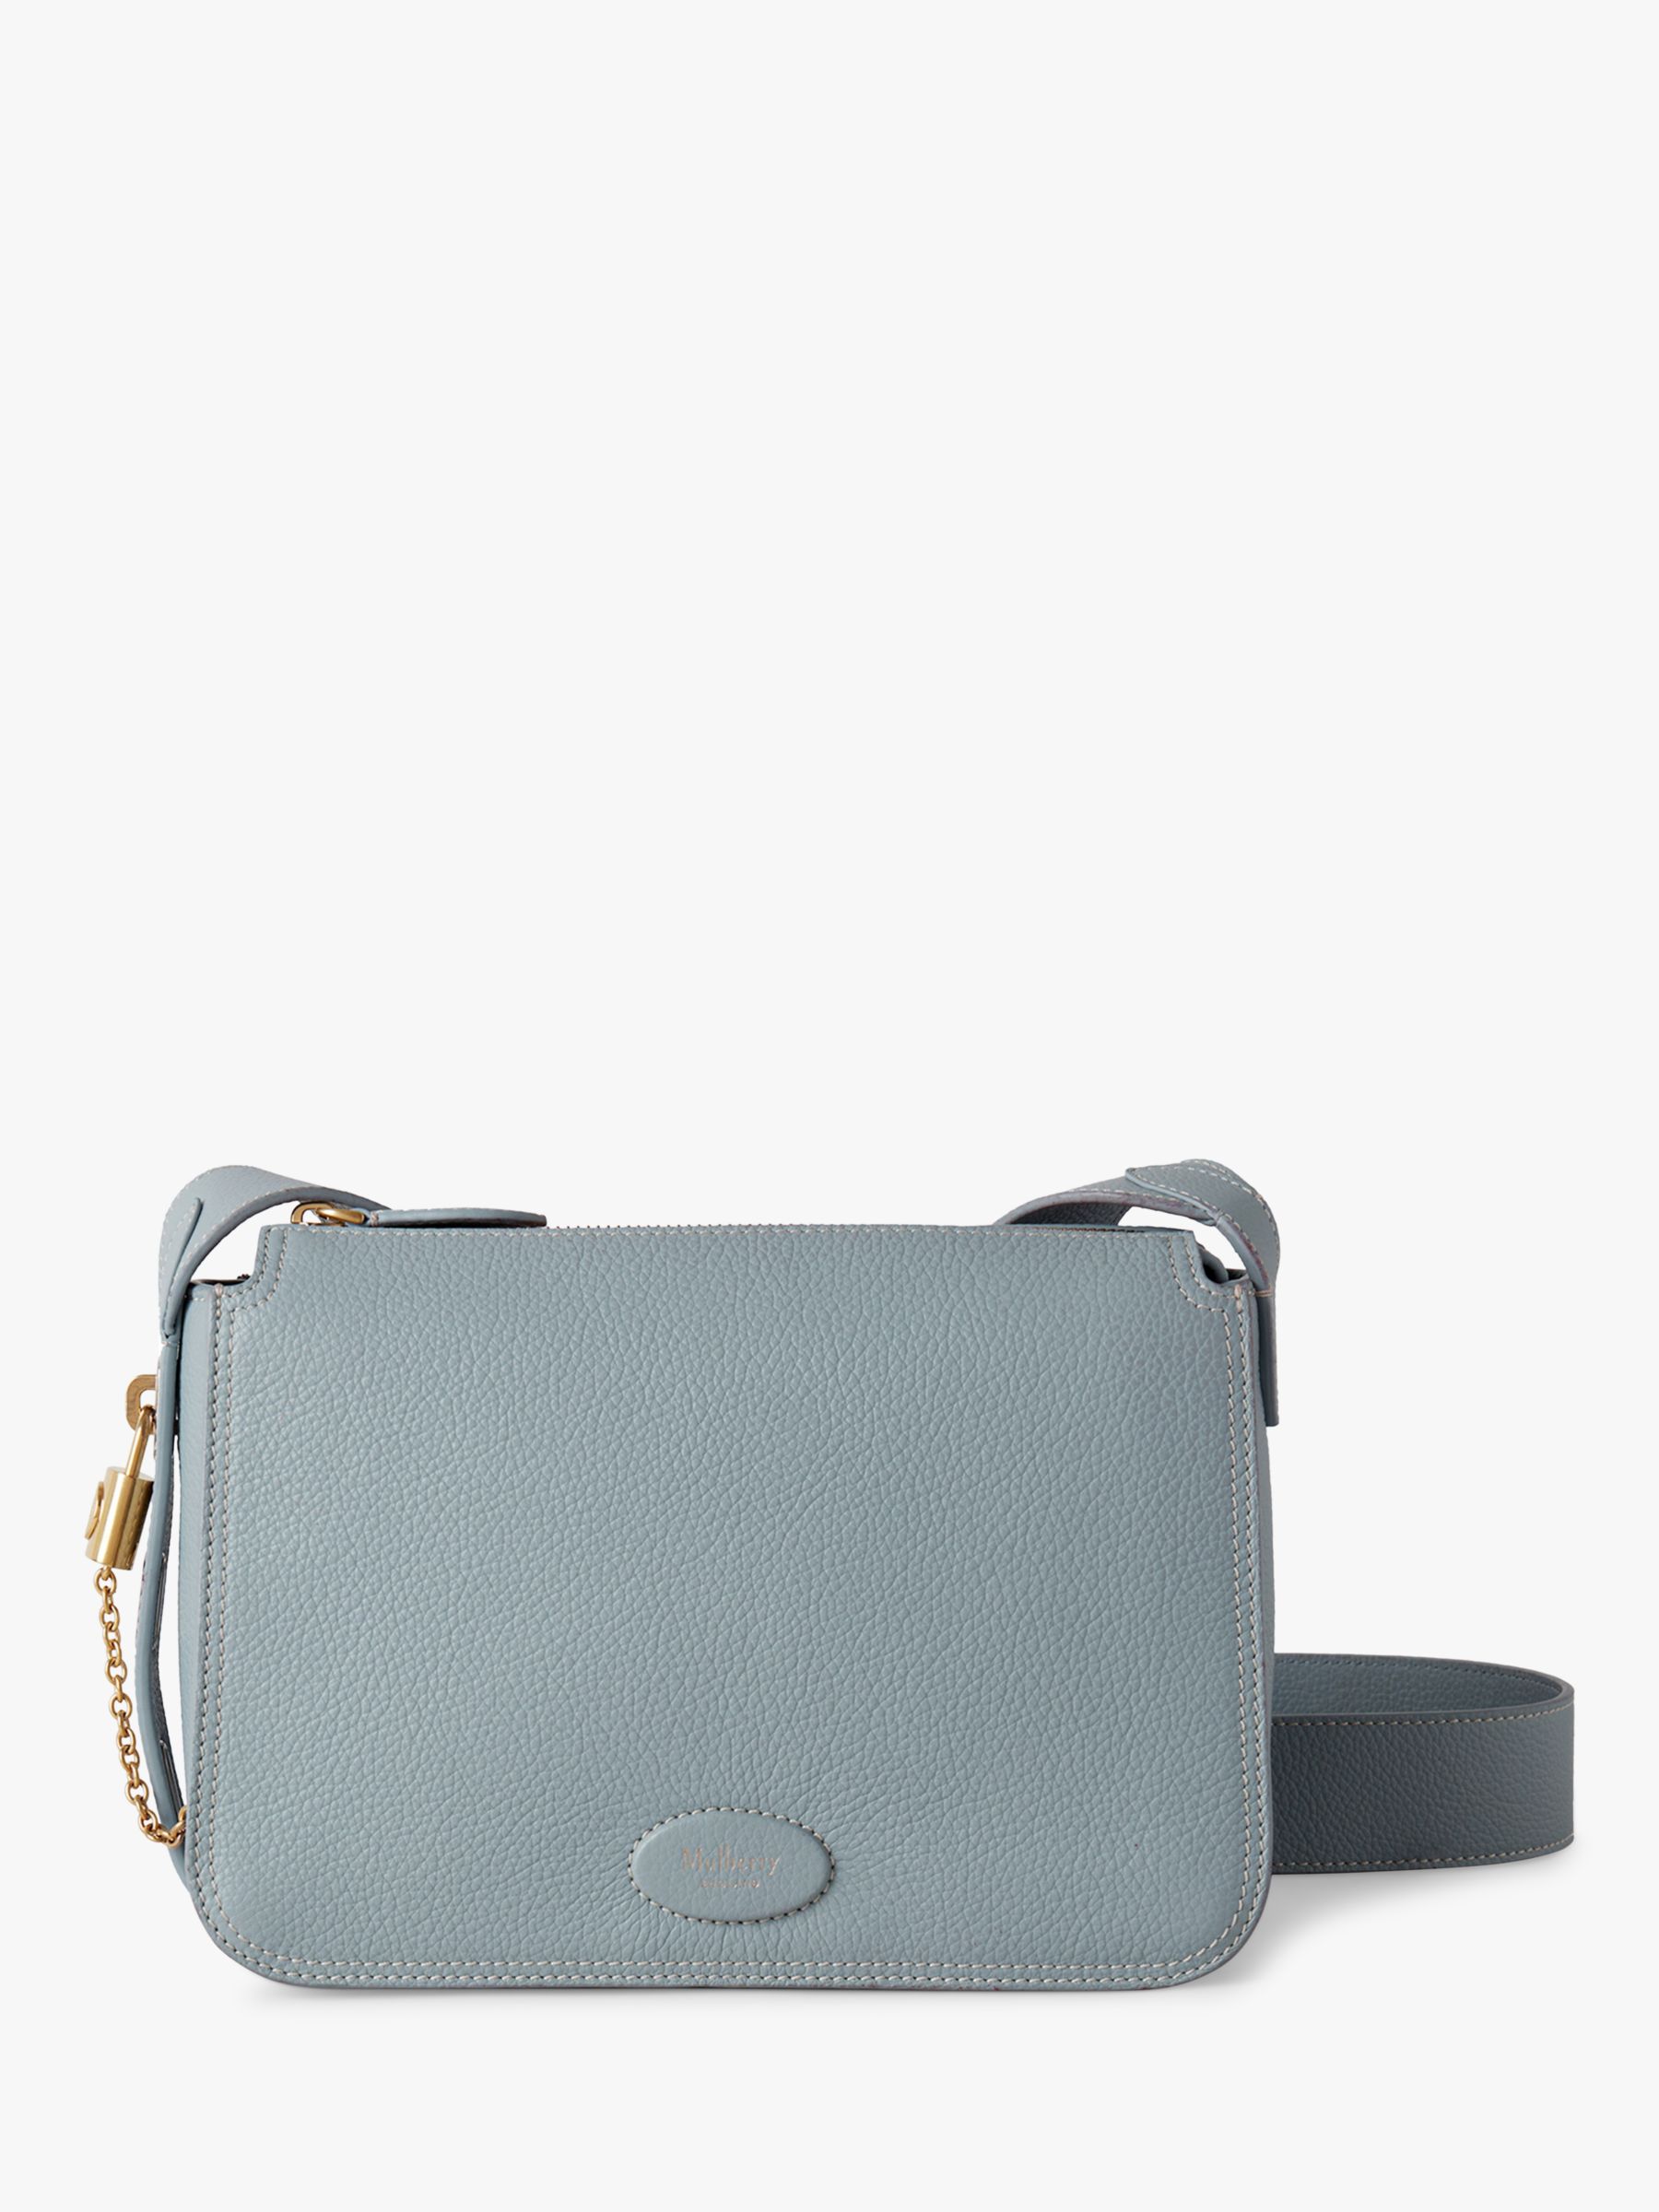 Mulberry Billie Small Classic Grain Leather Cross Body Bag, Charcoal at  John Lewis & Partners